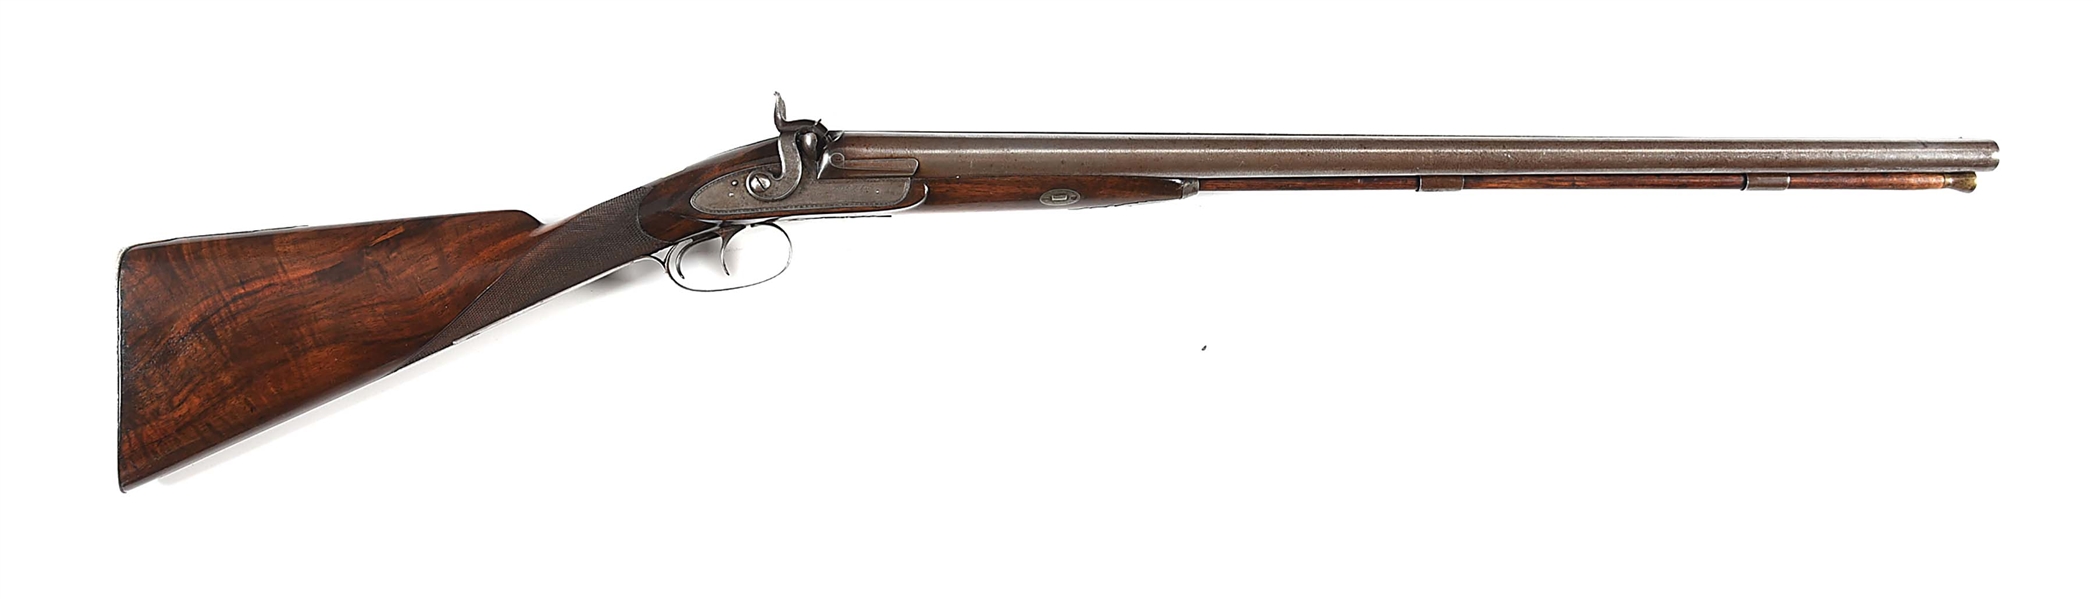 (A) WILLIAM KAY SIDE BY SIDE PERCUSSION SHOTGUN.